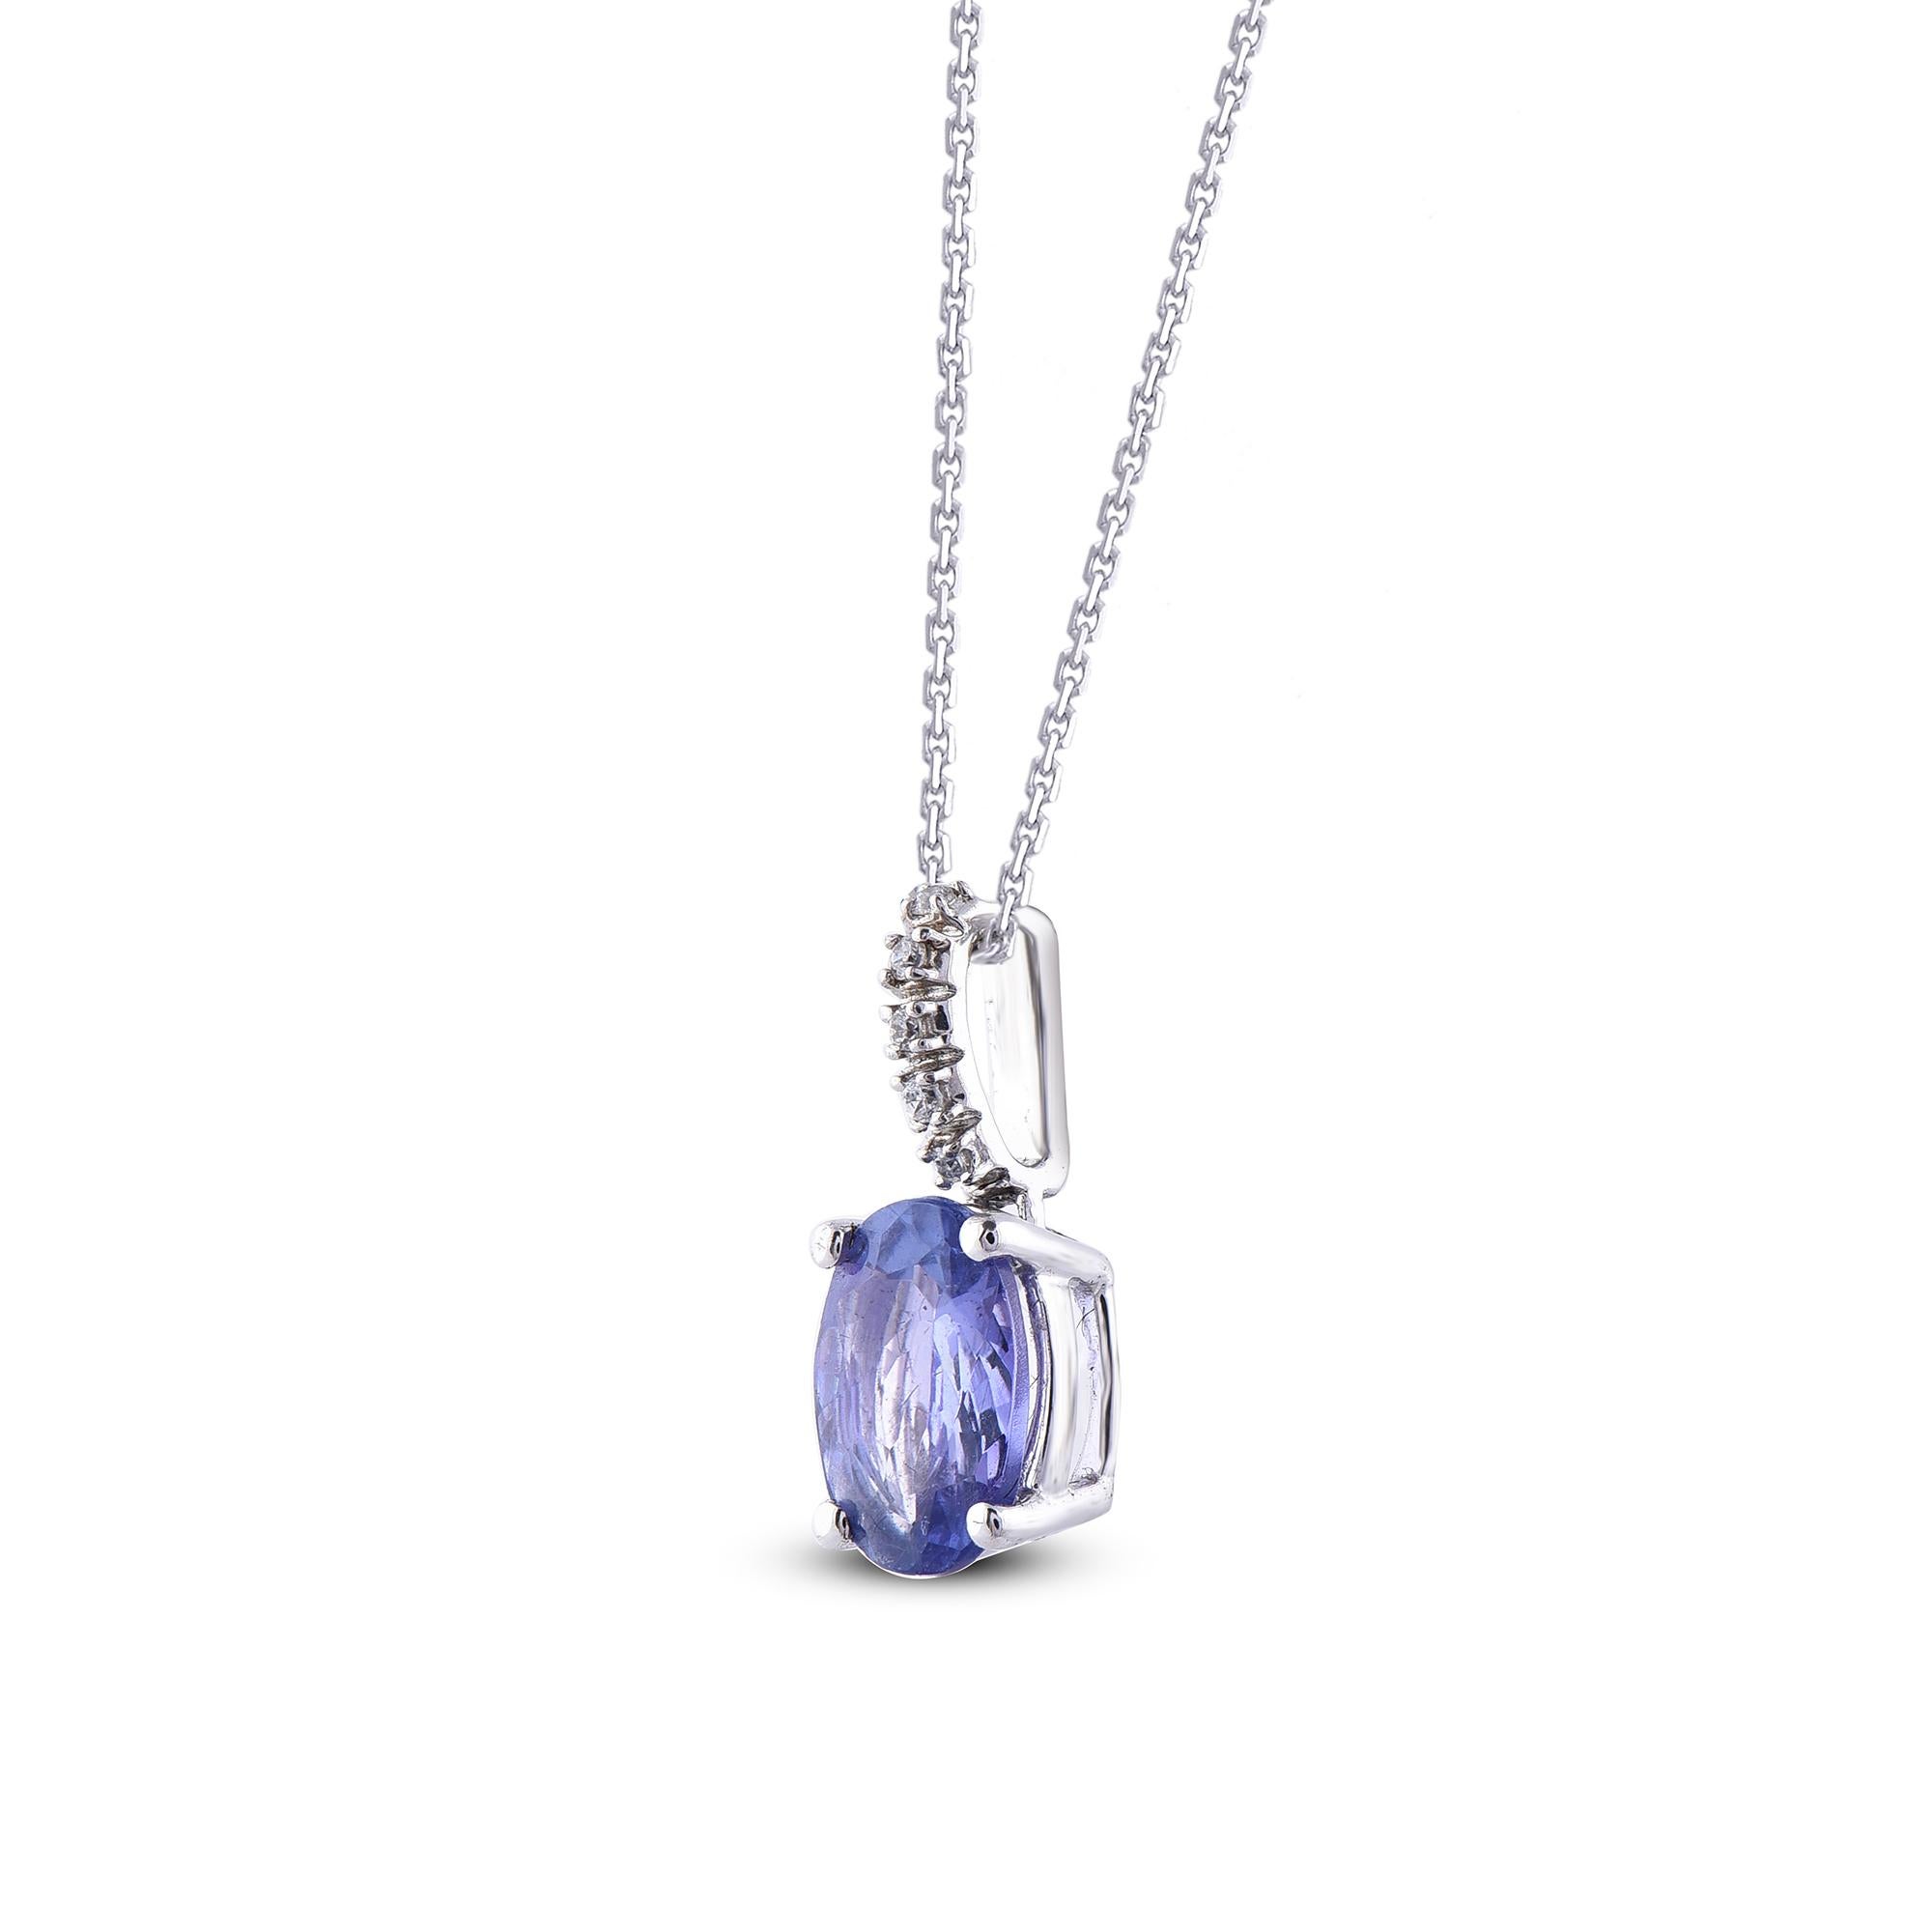 Truly exquisite, this diamond and tanzanite pendant is sure to be admired for the inherent classic beauty and elegance within its design. The total weight of diamonds 0.02 carat, H-I color, I2 Clarity and studded with 5 round diamond set in prong